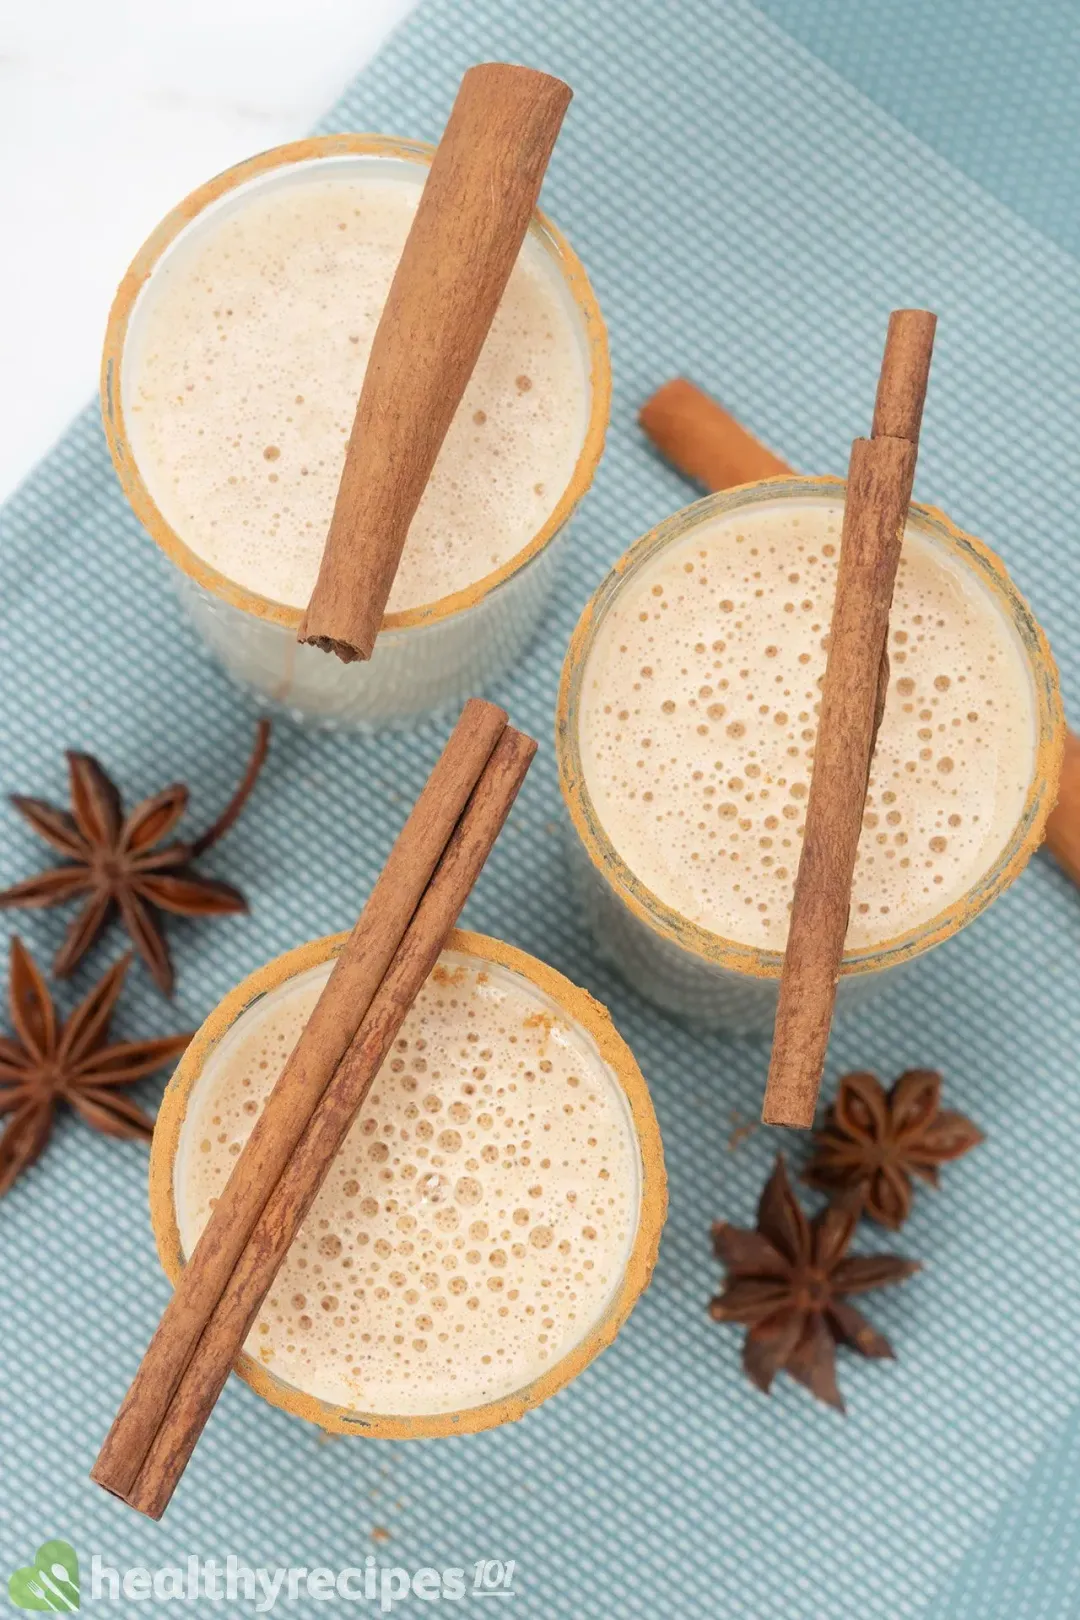 Three classes of foamy eggnog in different sizes topped with cinnamon sticks and surrounded by star anise